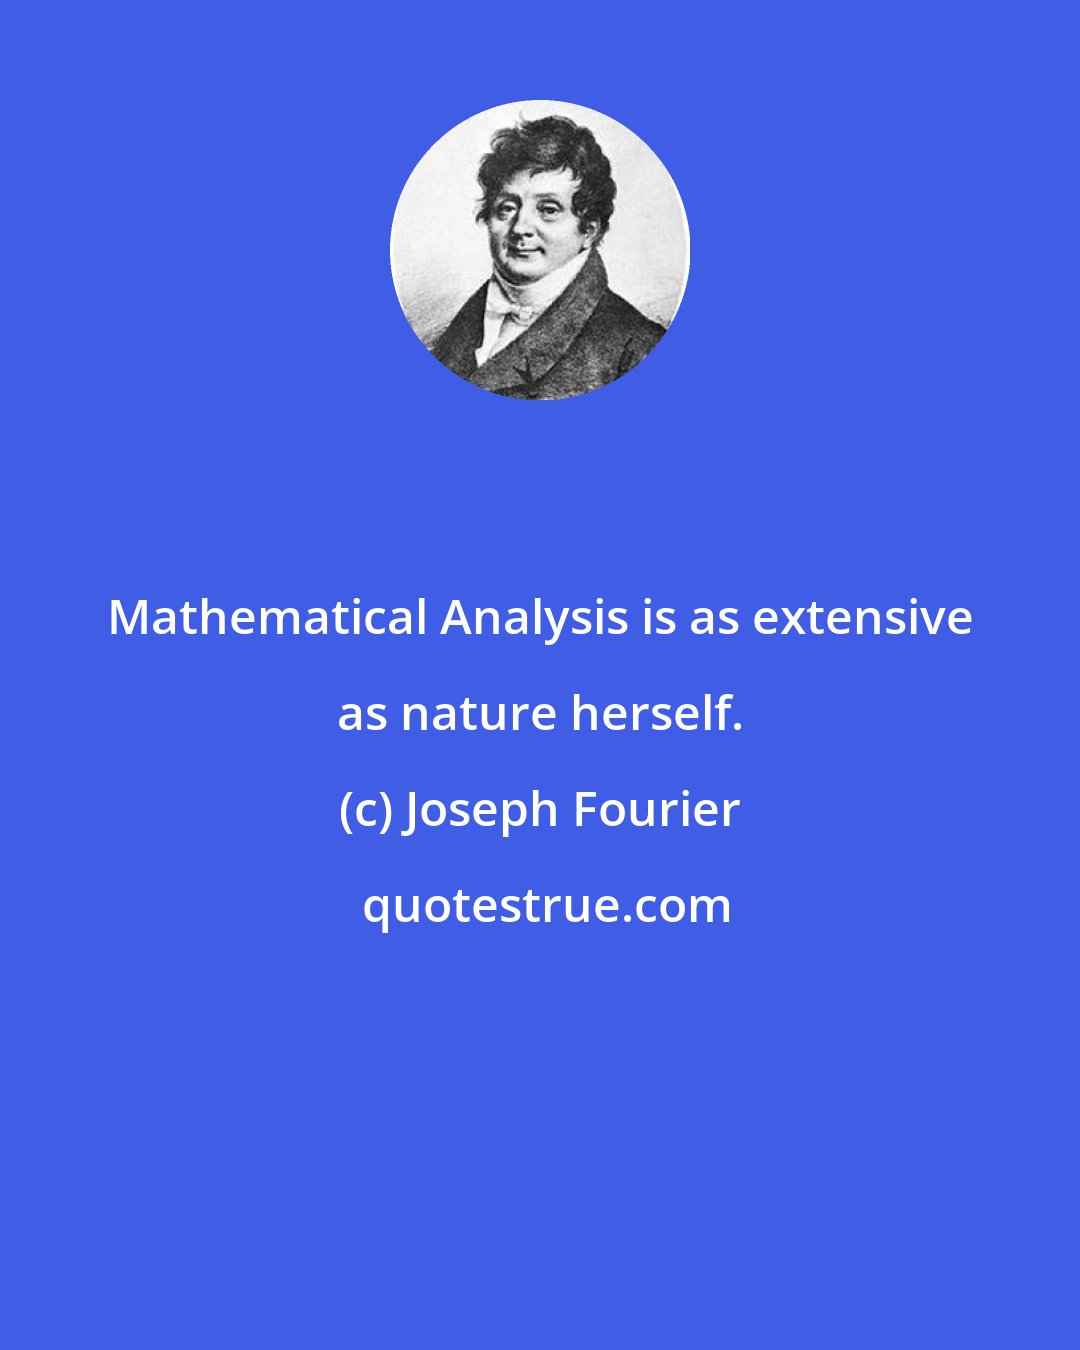 Joseph Fourier: Mathematical Analysis is as extensive as nature herself.